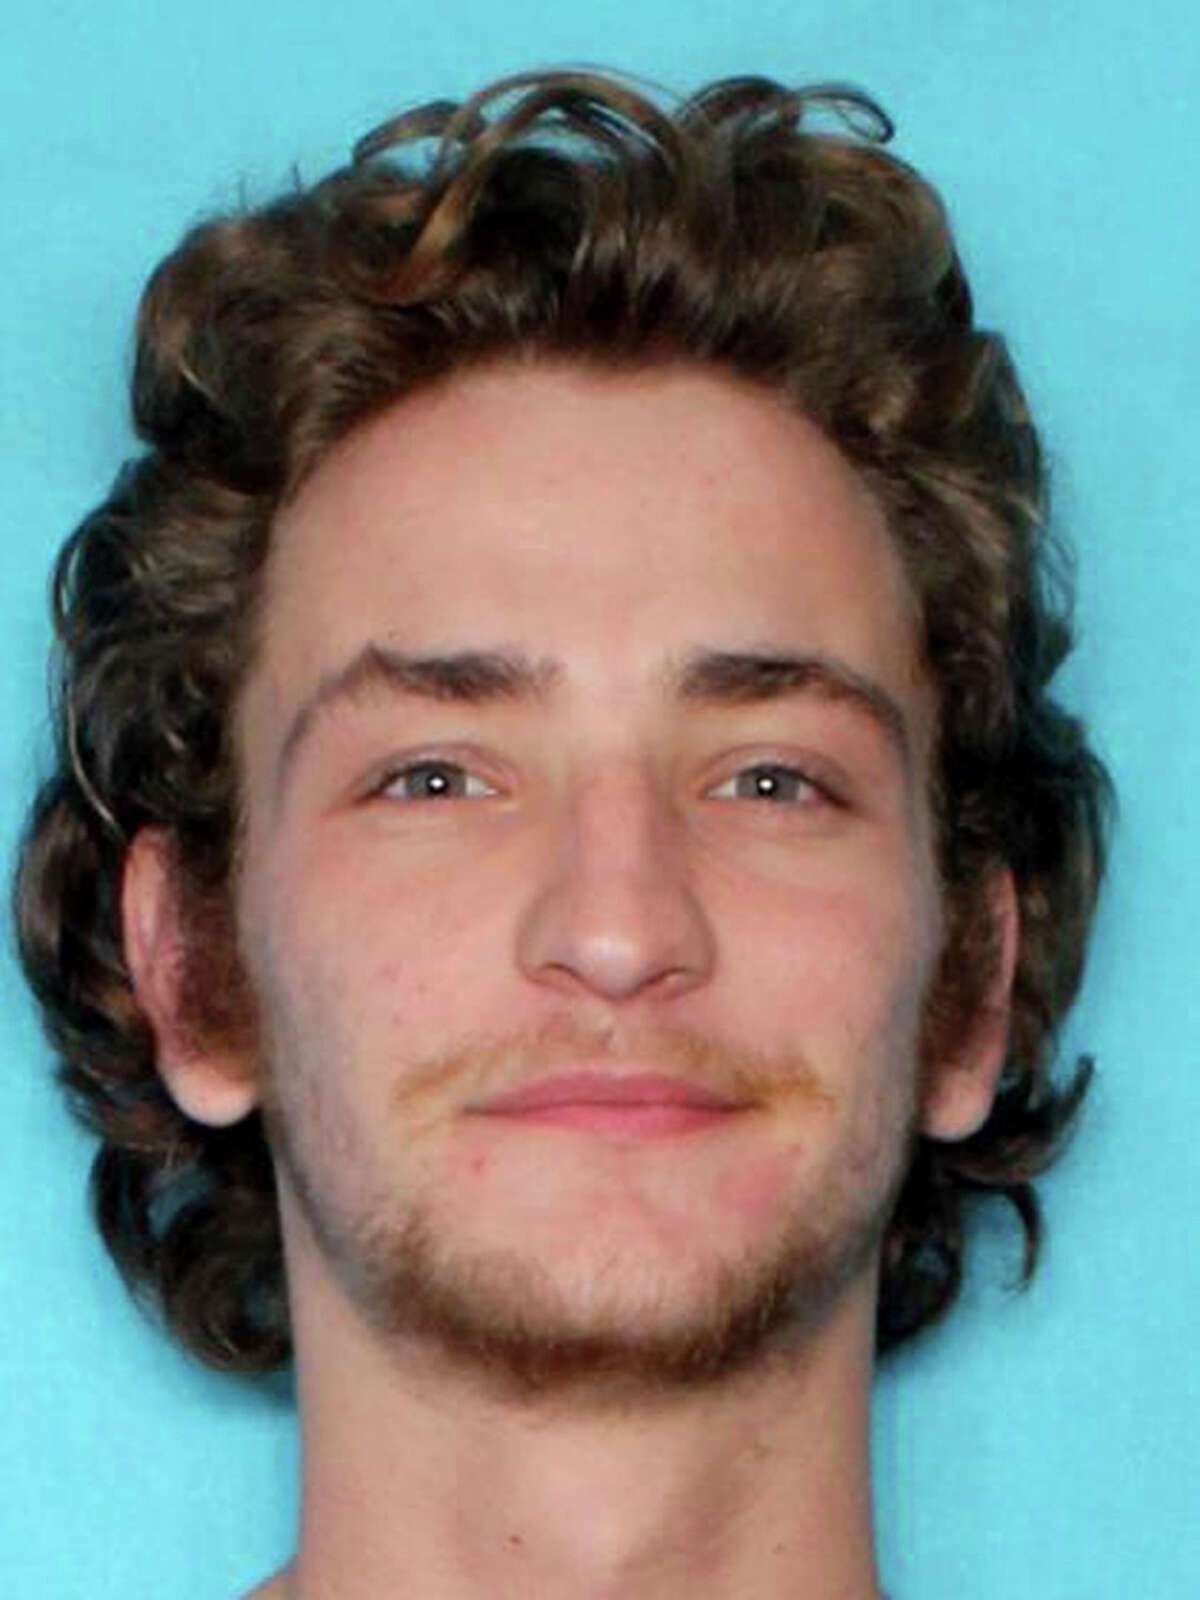 This undated photo provided by Livingston Parish Sheriff's Office shows Dakota Theriot. Authorities in Louisiana say separate but related shootings Saturday, Jan. 26, 2019, in Livingston and Ascension parishes have left five people dead. They've identified 21-year-old Theriot as the suspect and are actively searching for him. (Livingston Parish Sheriff's Office via AP)